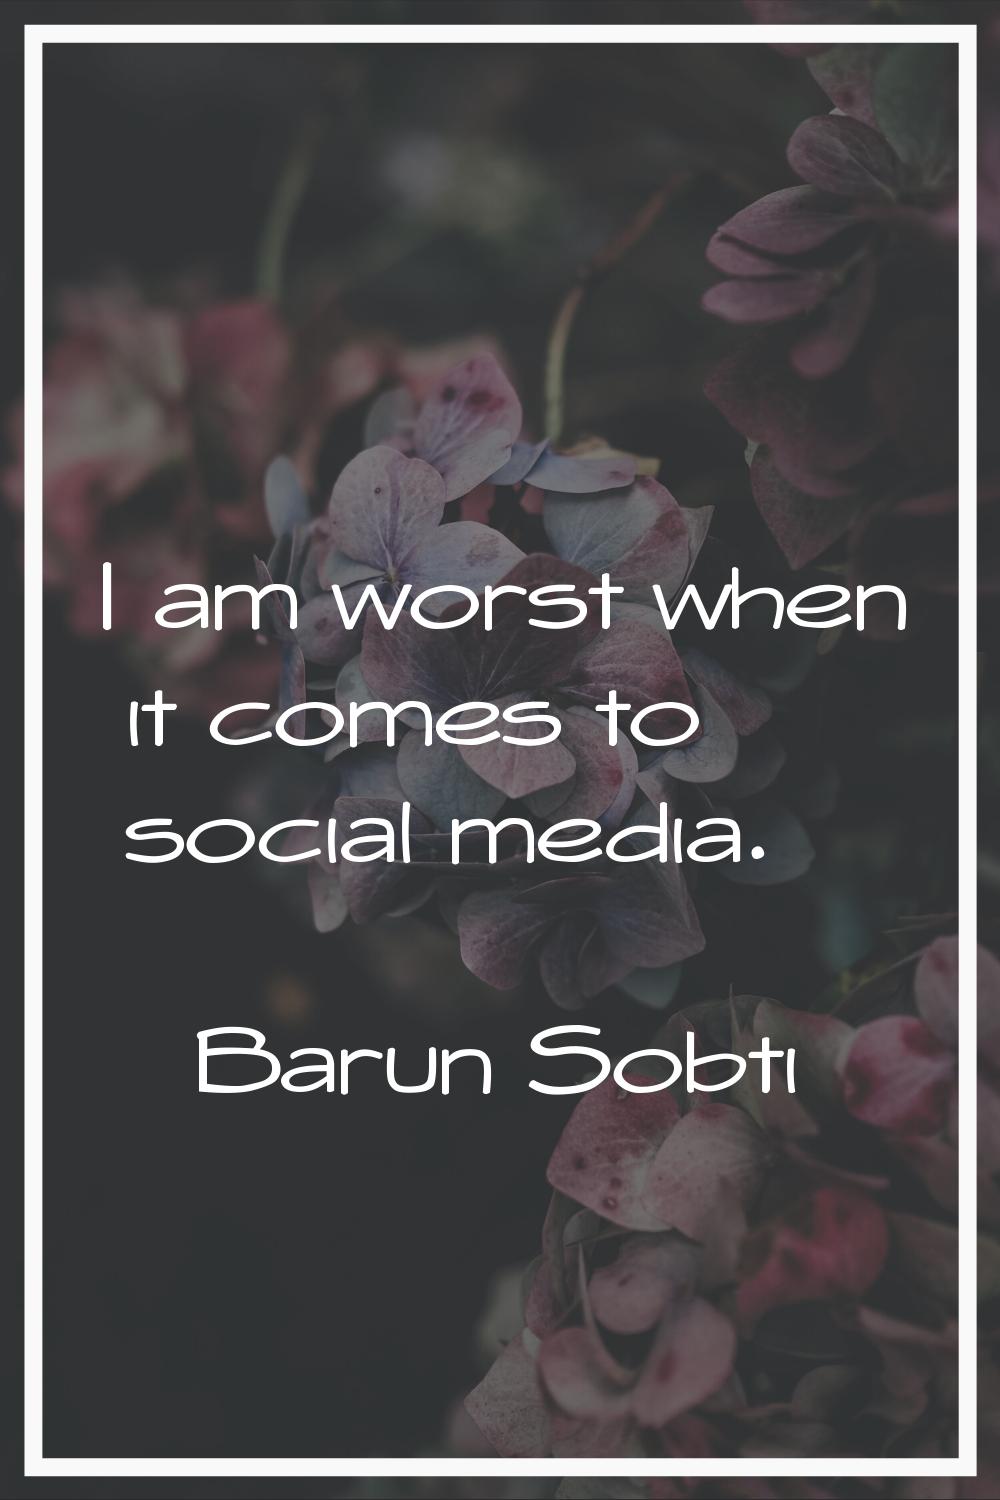 I am worst when it comes to social media.